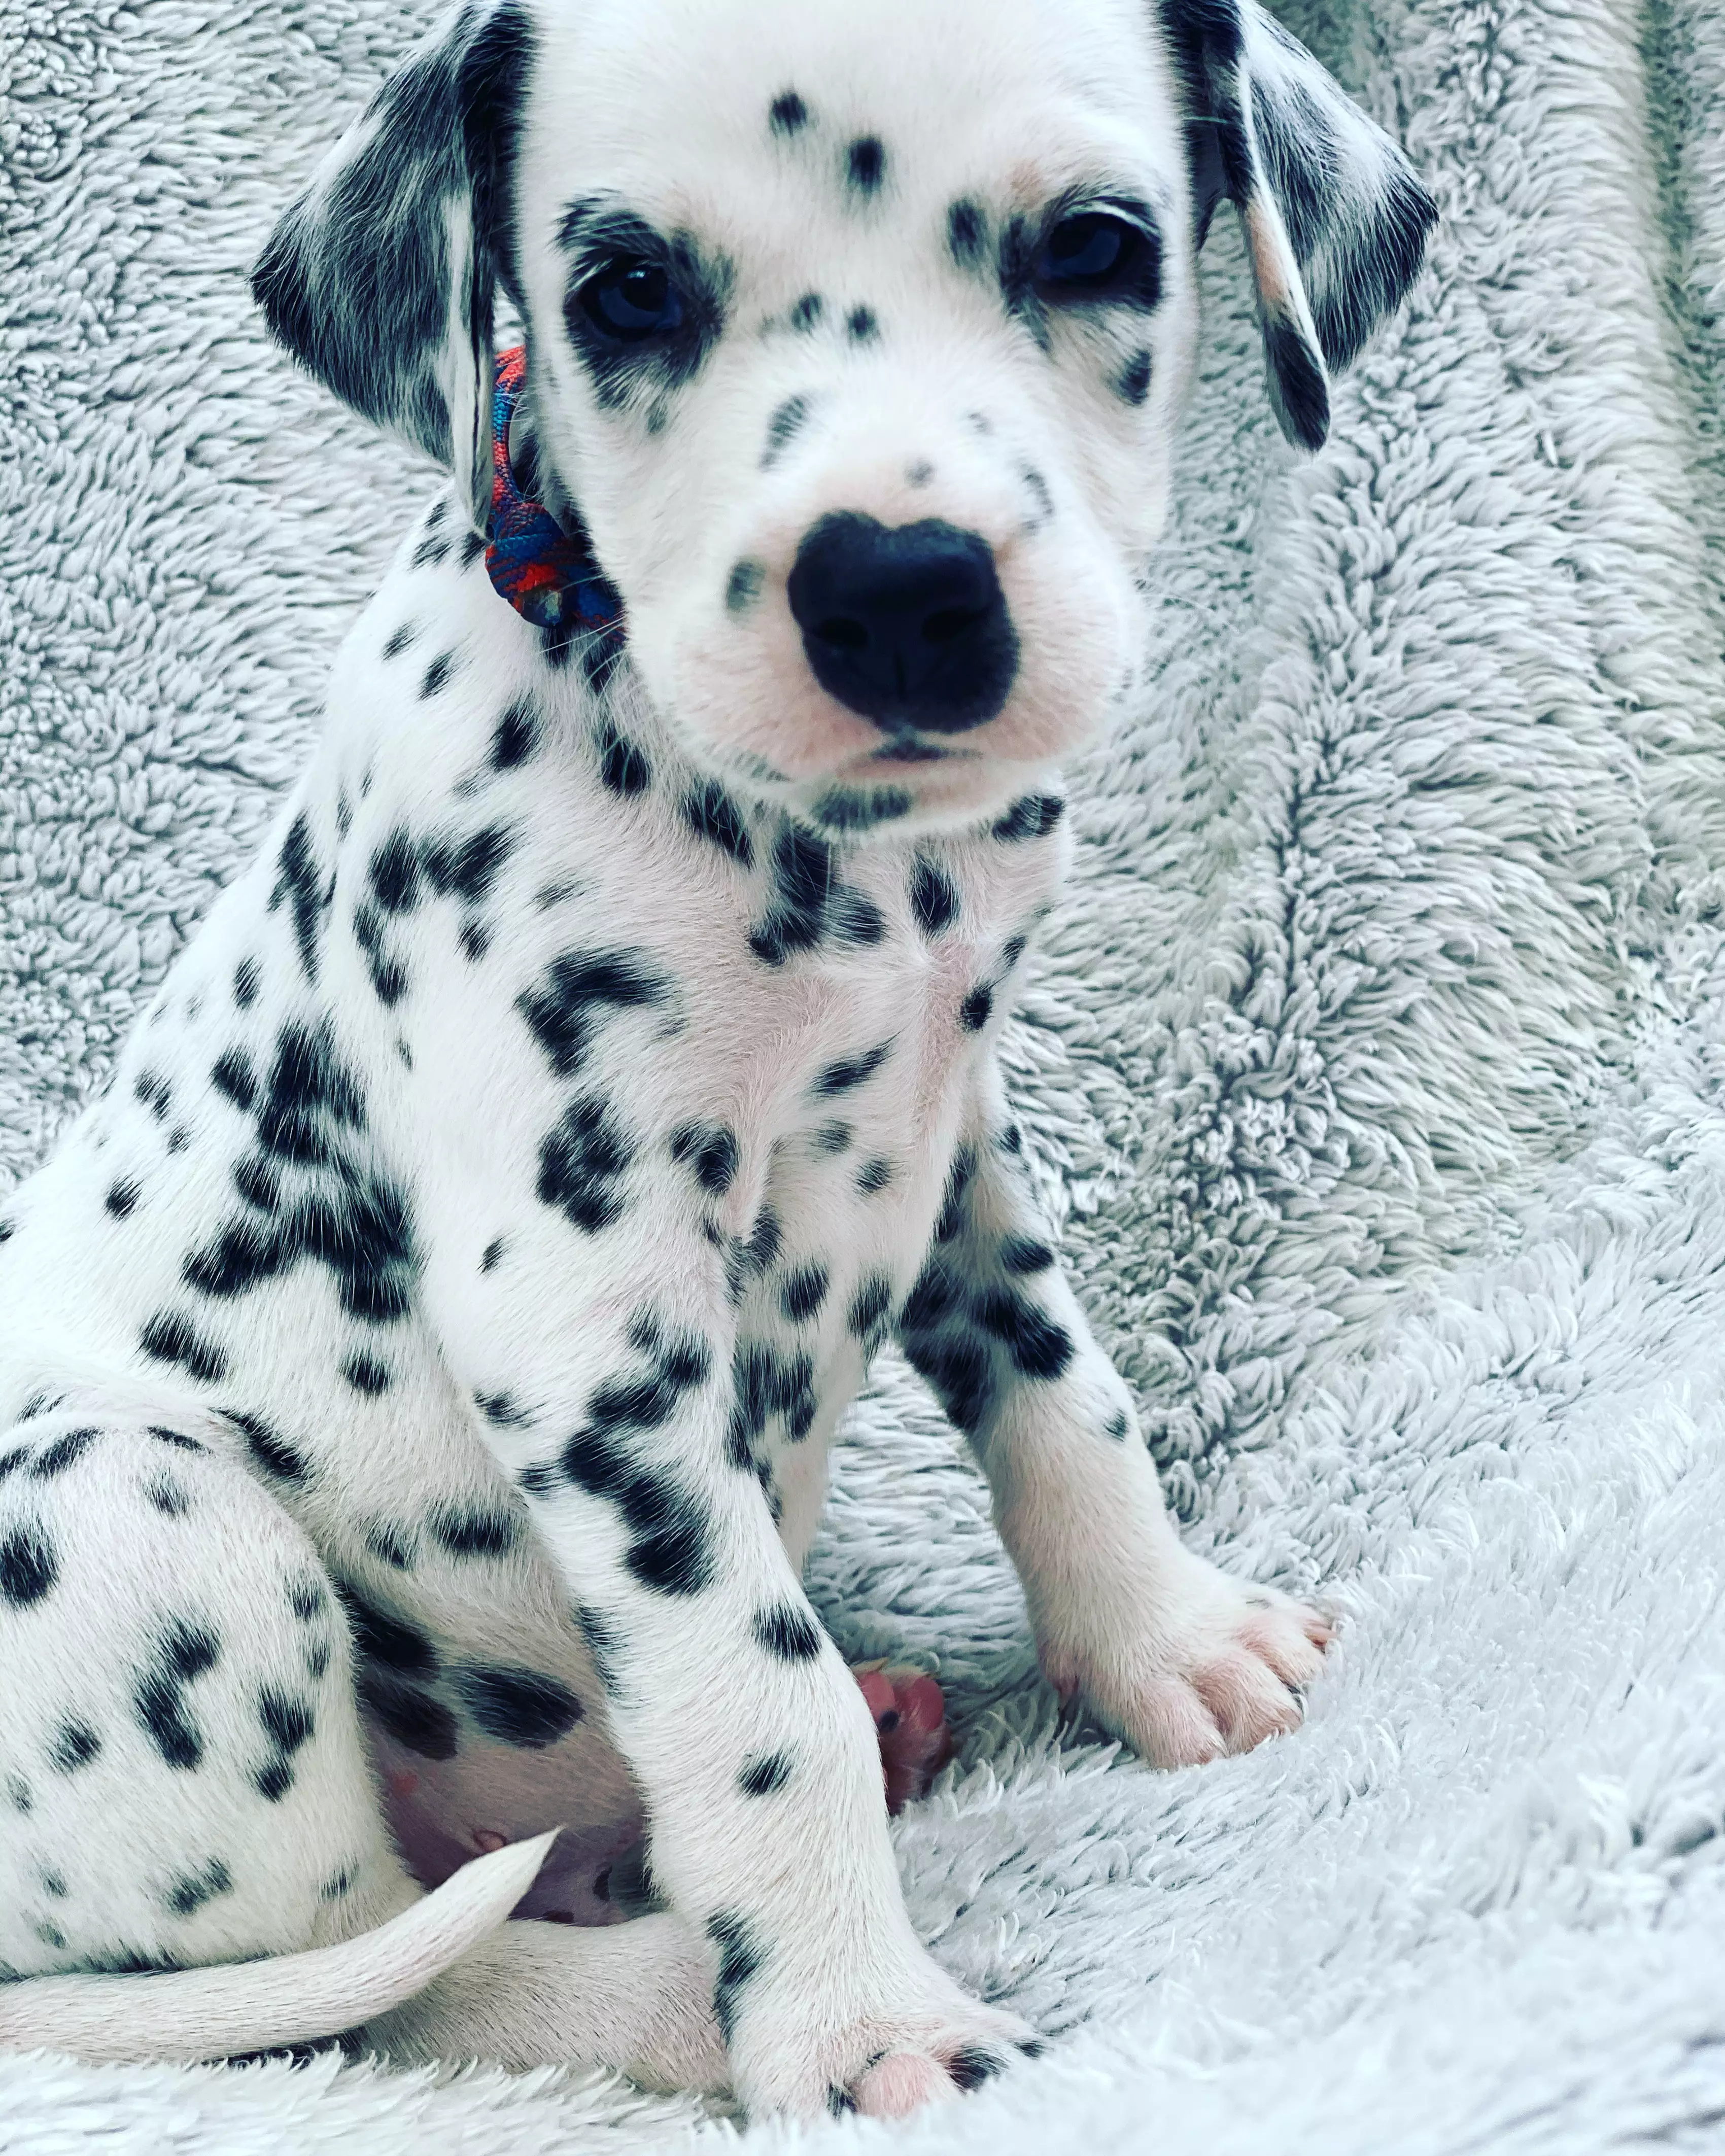 The little Dalmatian pup is now thriving (